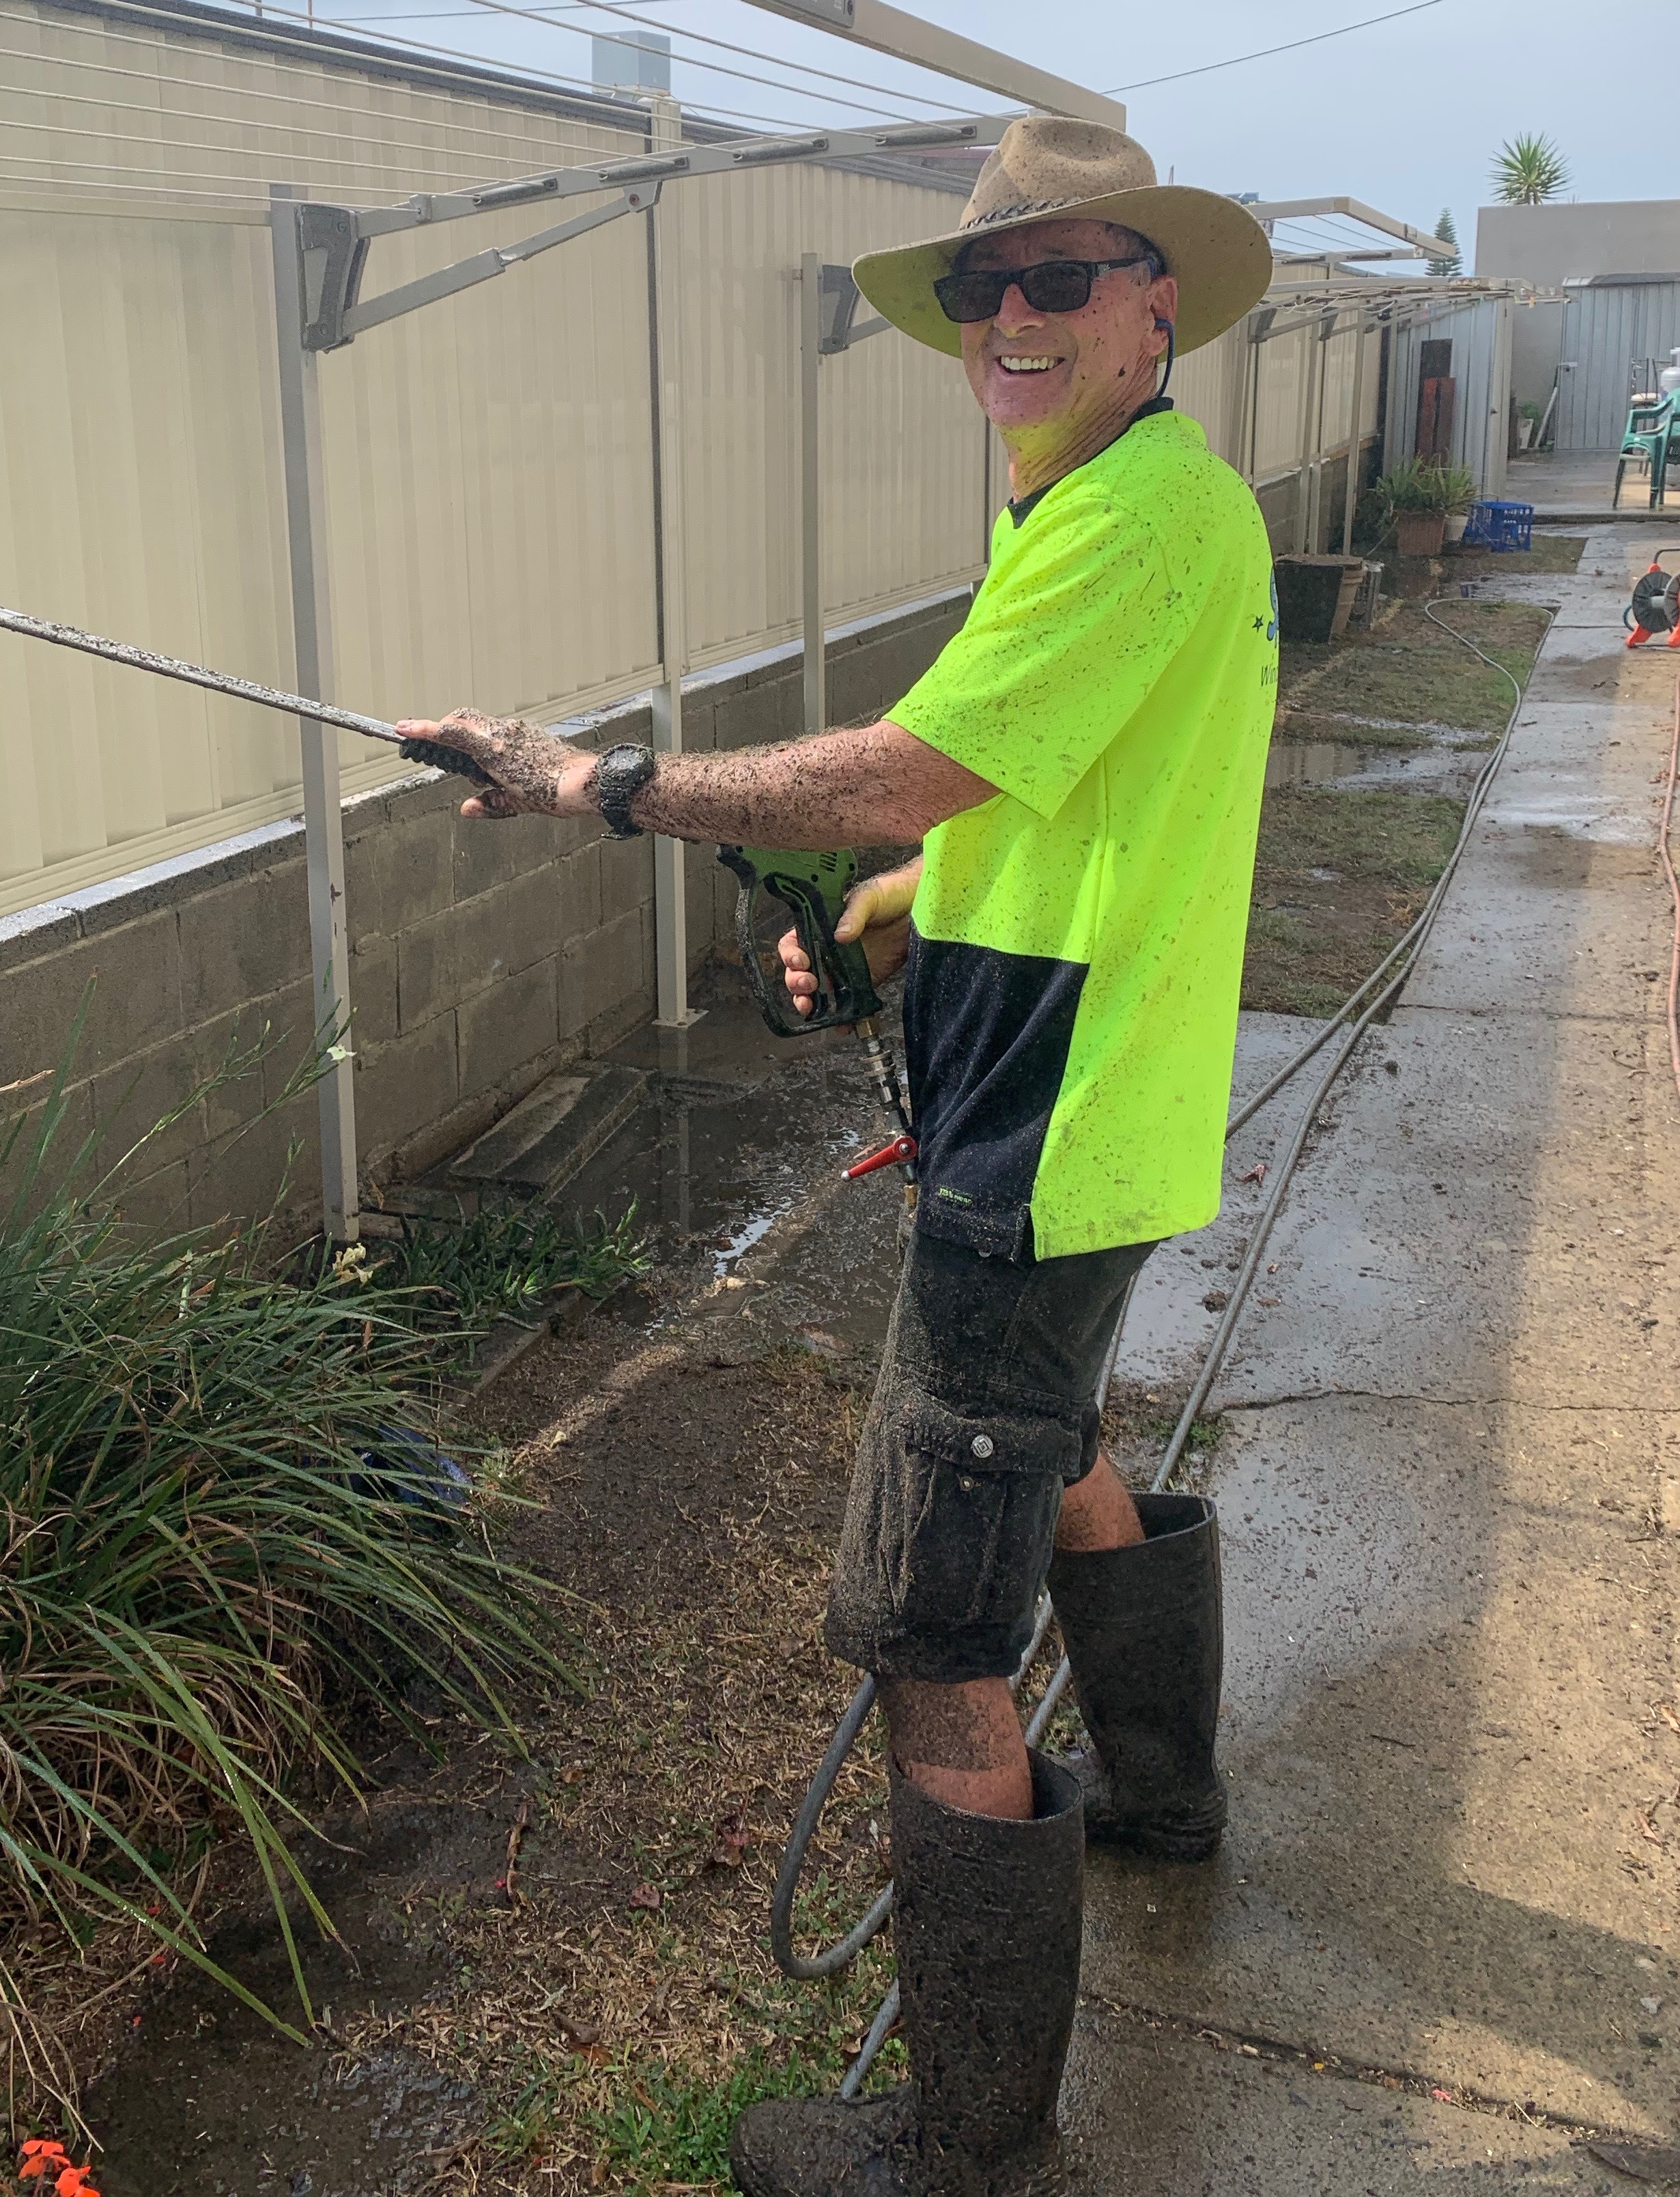 Here's a pic of Mike Salmon, the newest member of the Sparkle Team.  Mike has been cleaning windows for 20 years or more and he always has a smile on his face - just look at him here... caked in dirt and loving every minute of it.